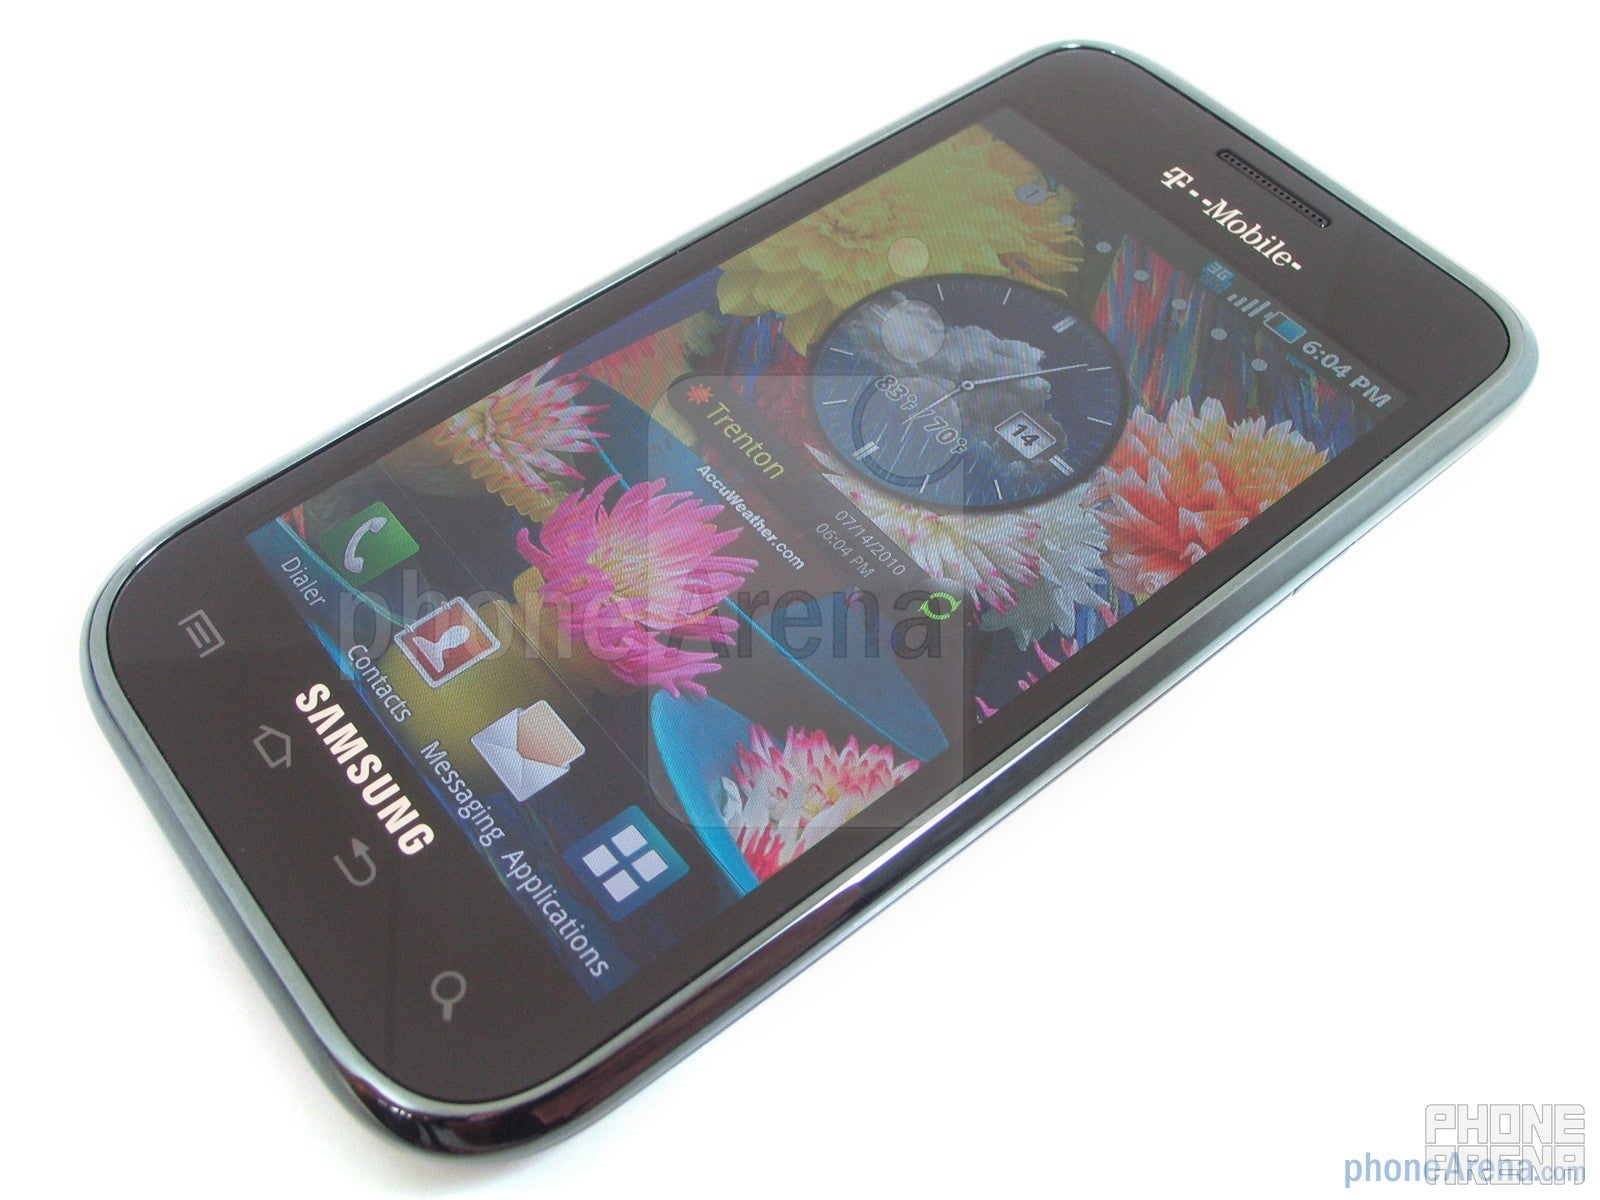 Samsung Vibrant Review